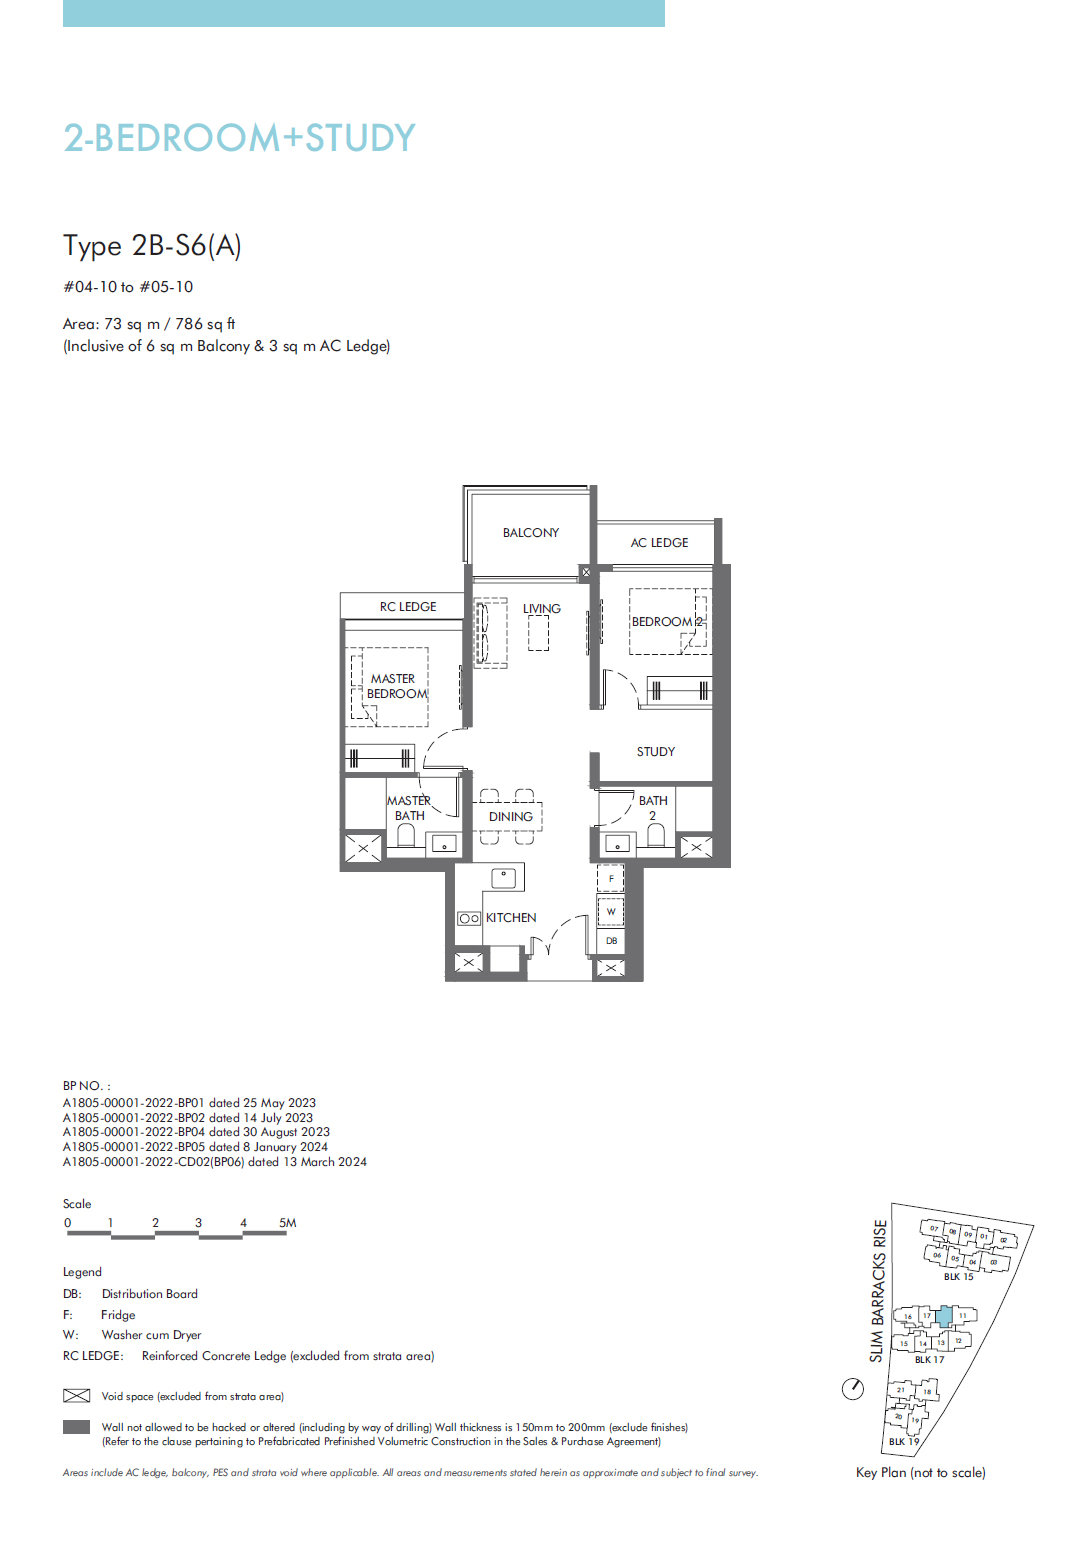 The Hill @ One North 鑫丰悦景 2 Bedroom + Study 2B-S6(A)